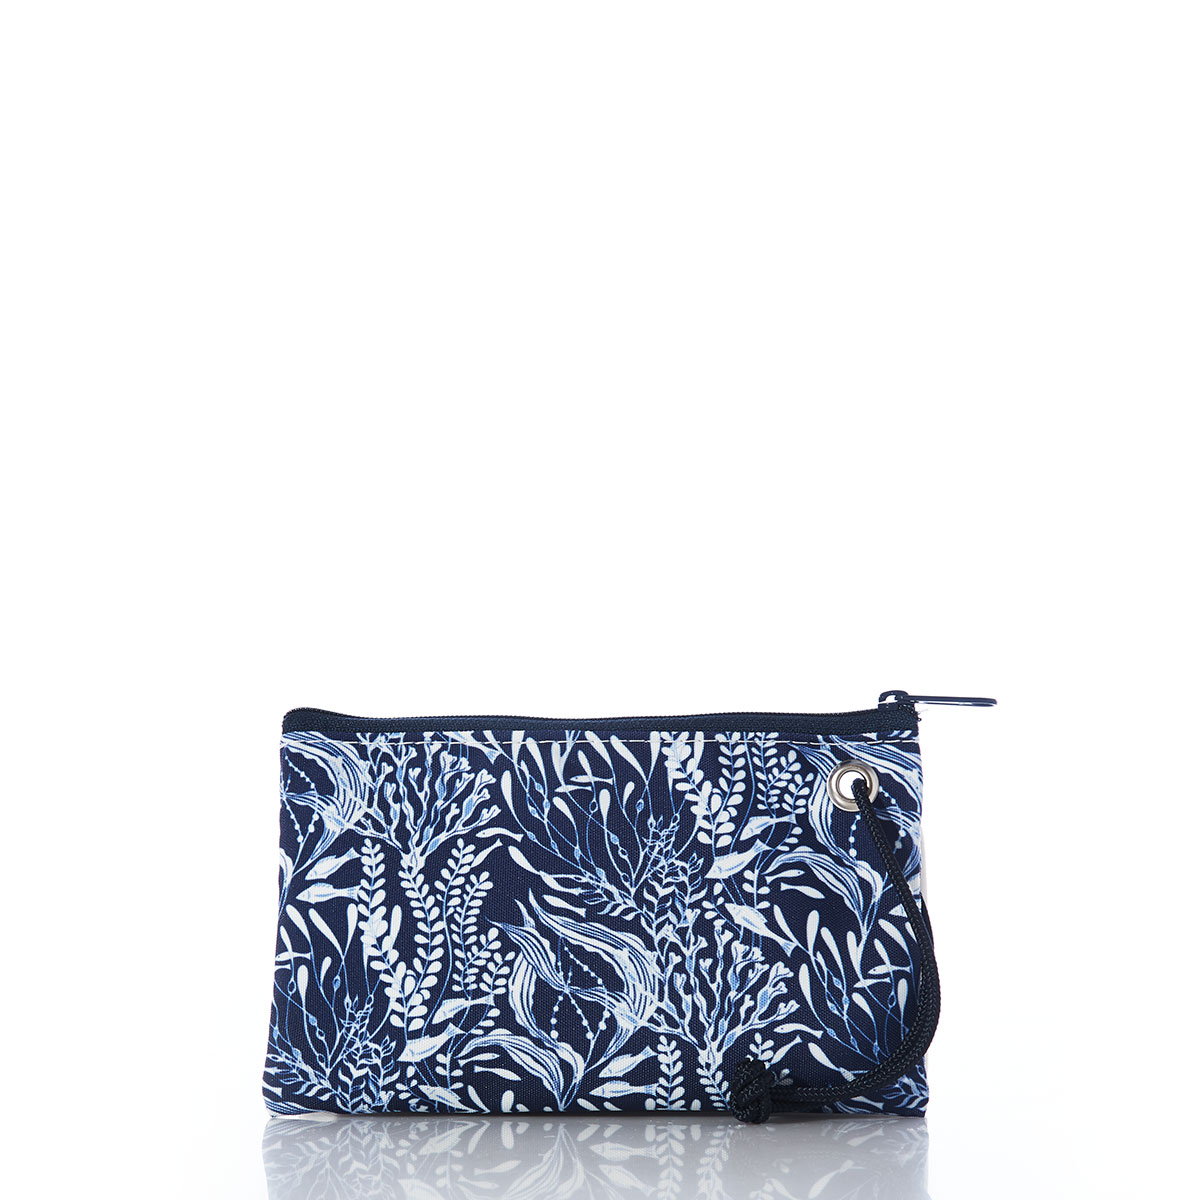 little fish swim among various types of seaweed in shades of navy and white on a recycled sail cloth wristlet